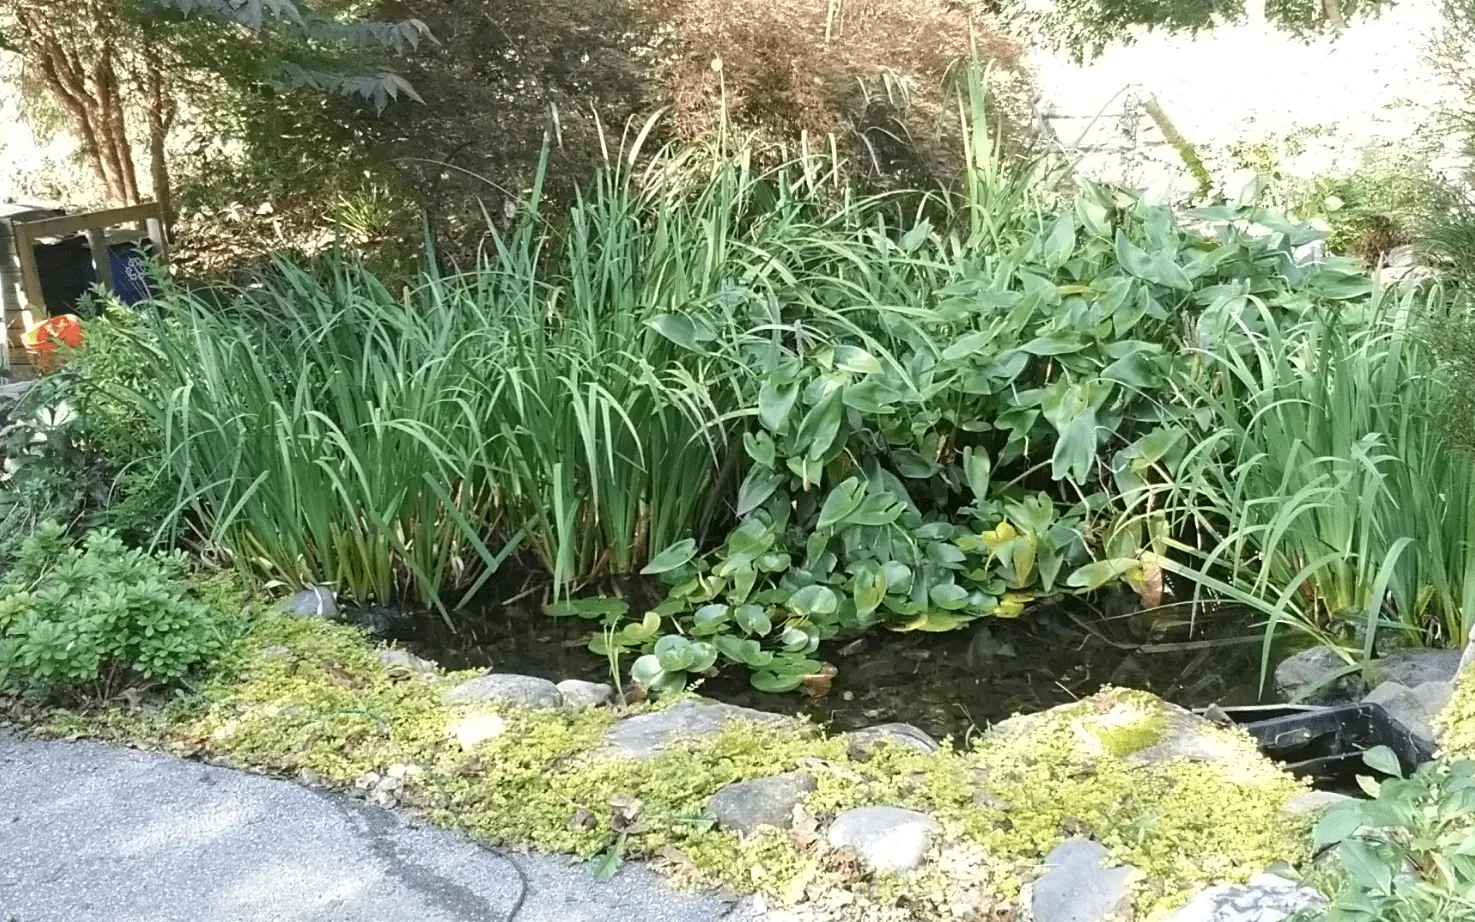 Overgrown pond plants that were removed during the cleaning service